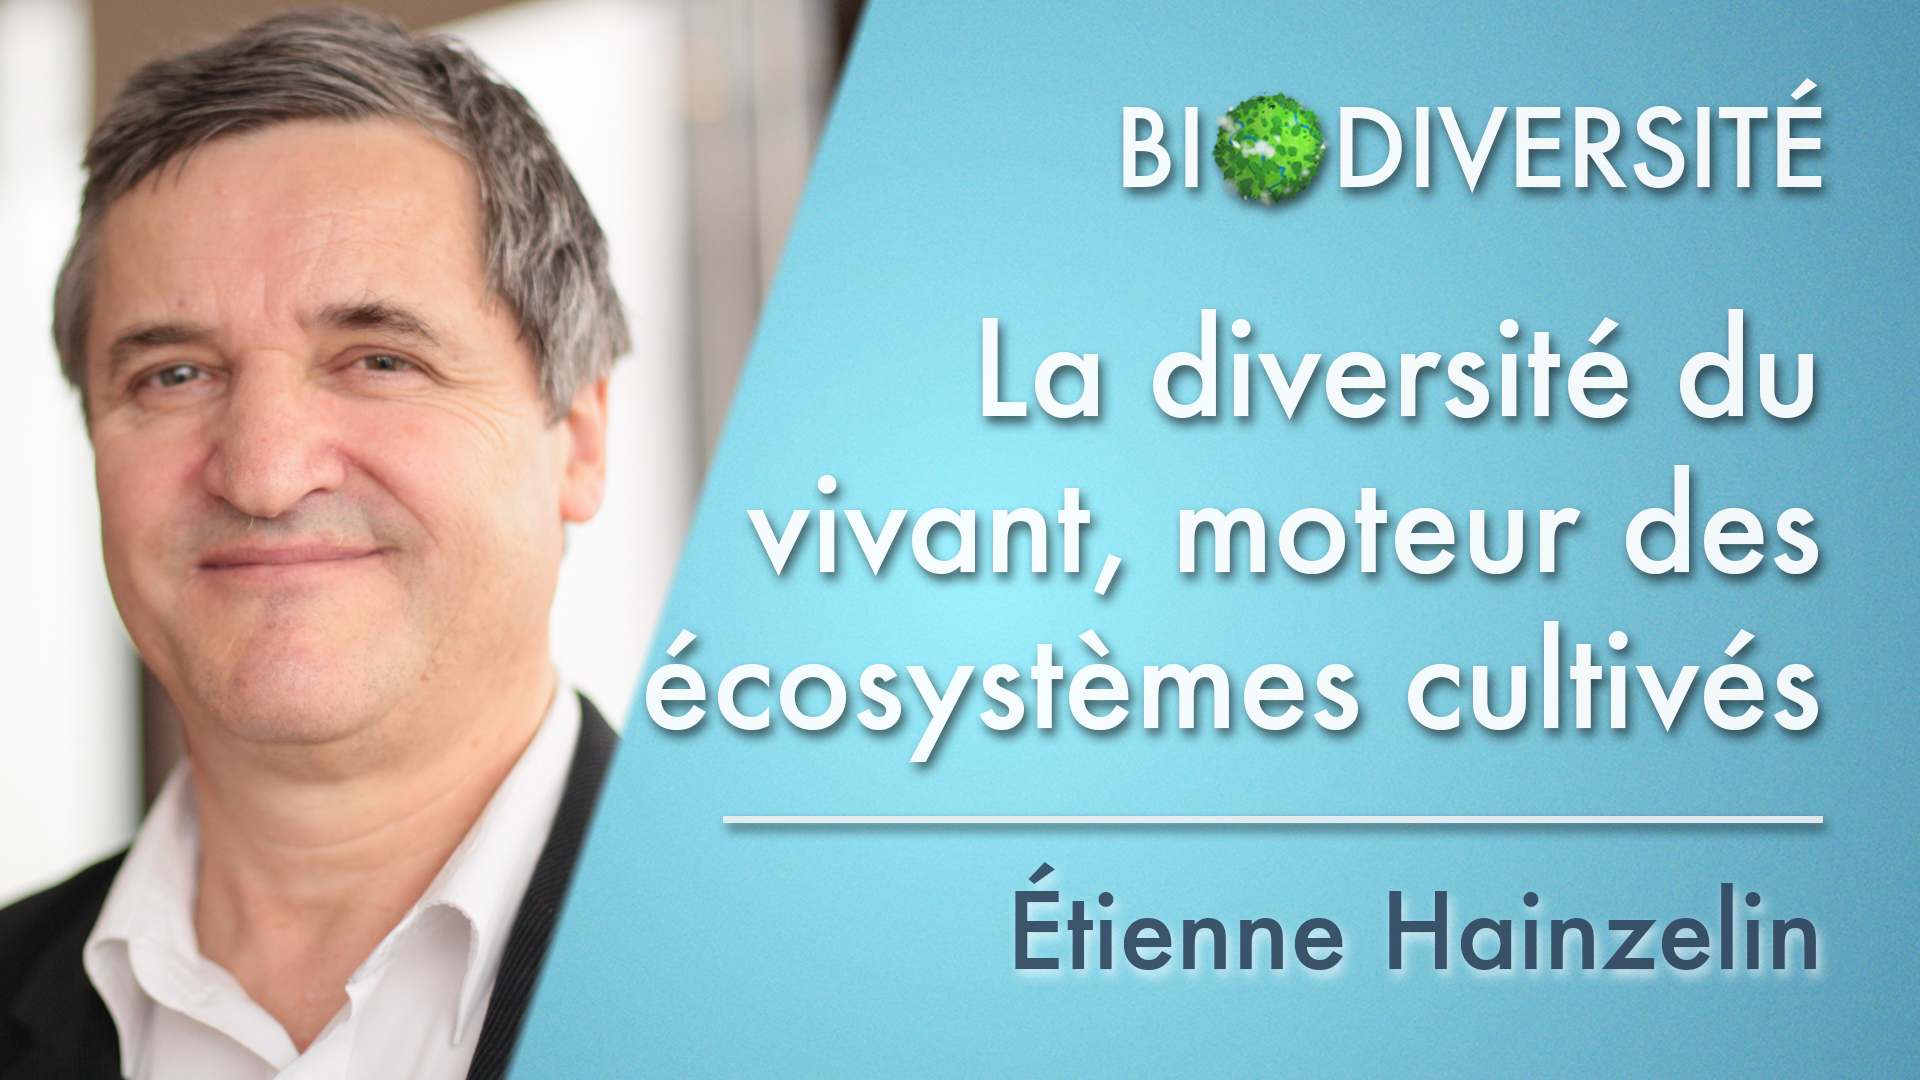 EN-2. The diversity of life, the driving force of cultivated ecosystems.